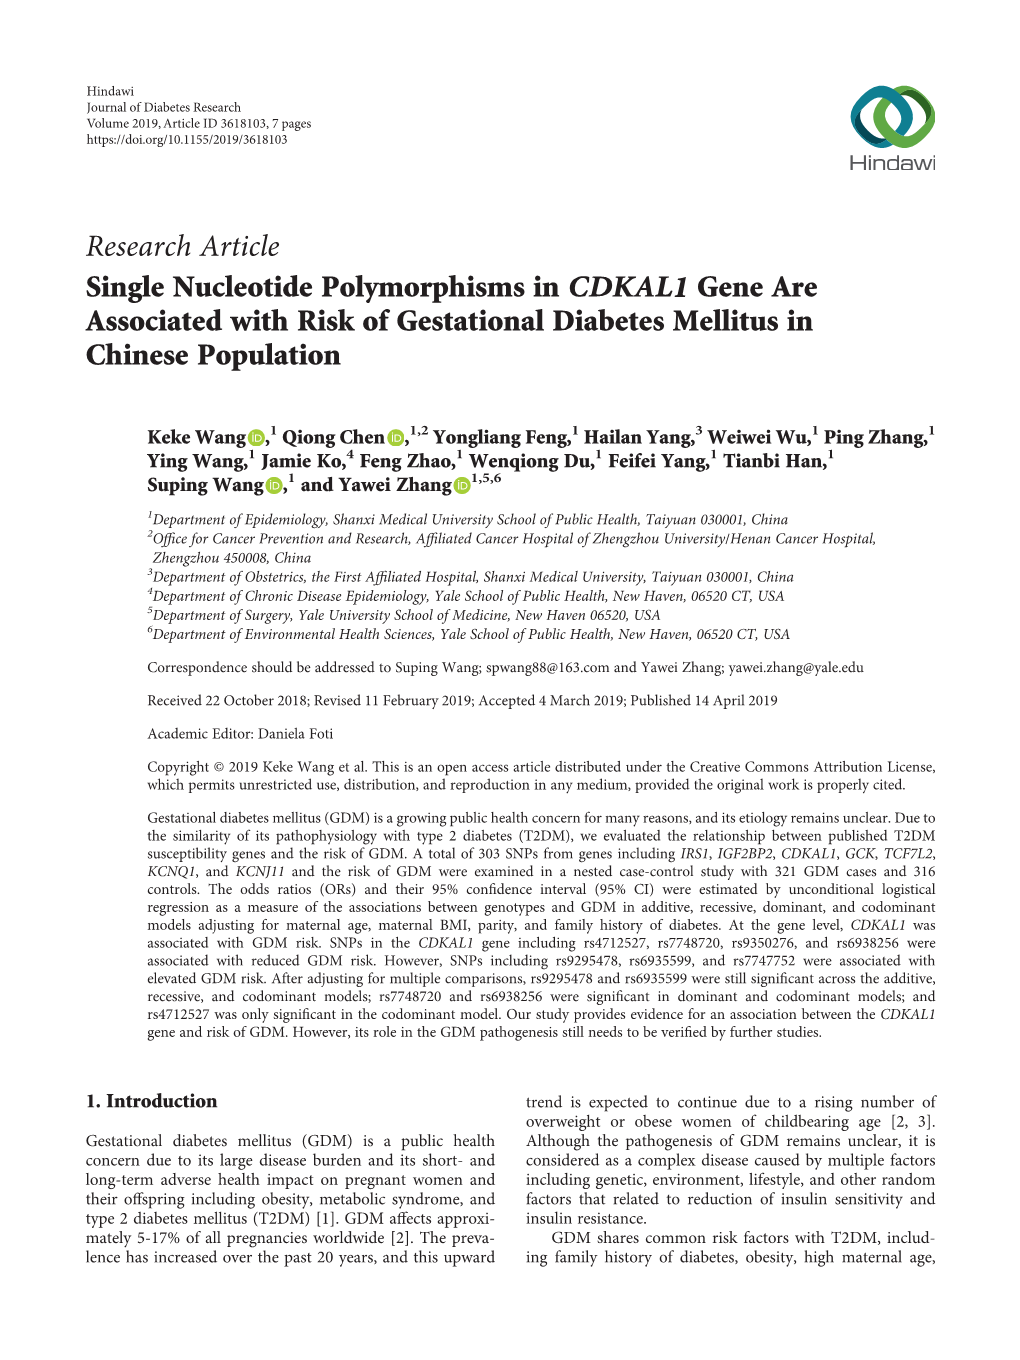 Single Nucleotide Polymorphisms in CDKAL1 Gene Are Associated with Risk of Gestational Diabetes Mellitus in Chinese Population